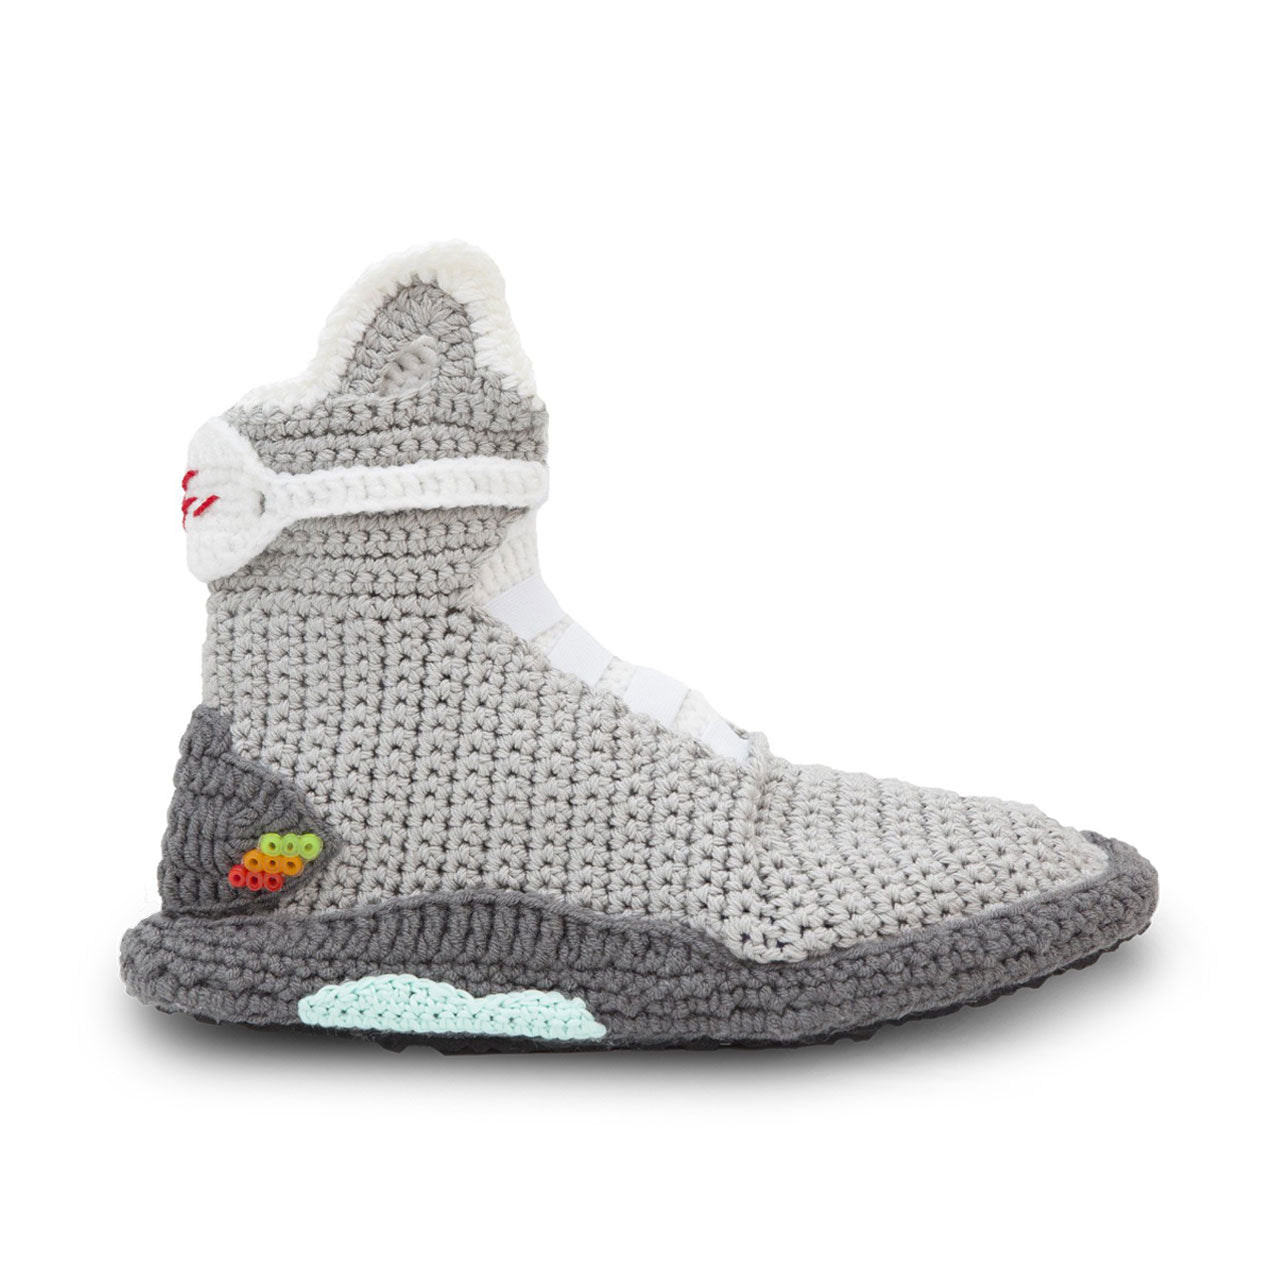 Fuggit BTTF Knit House Shoes